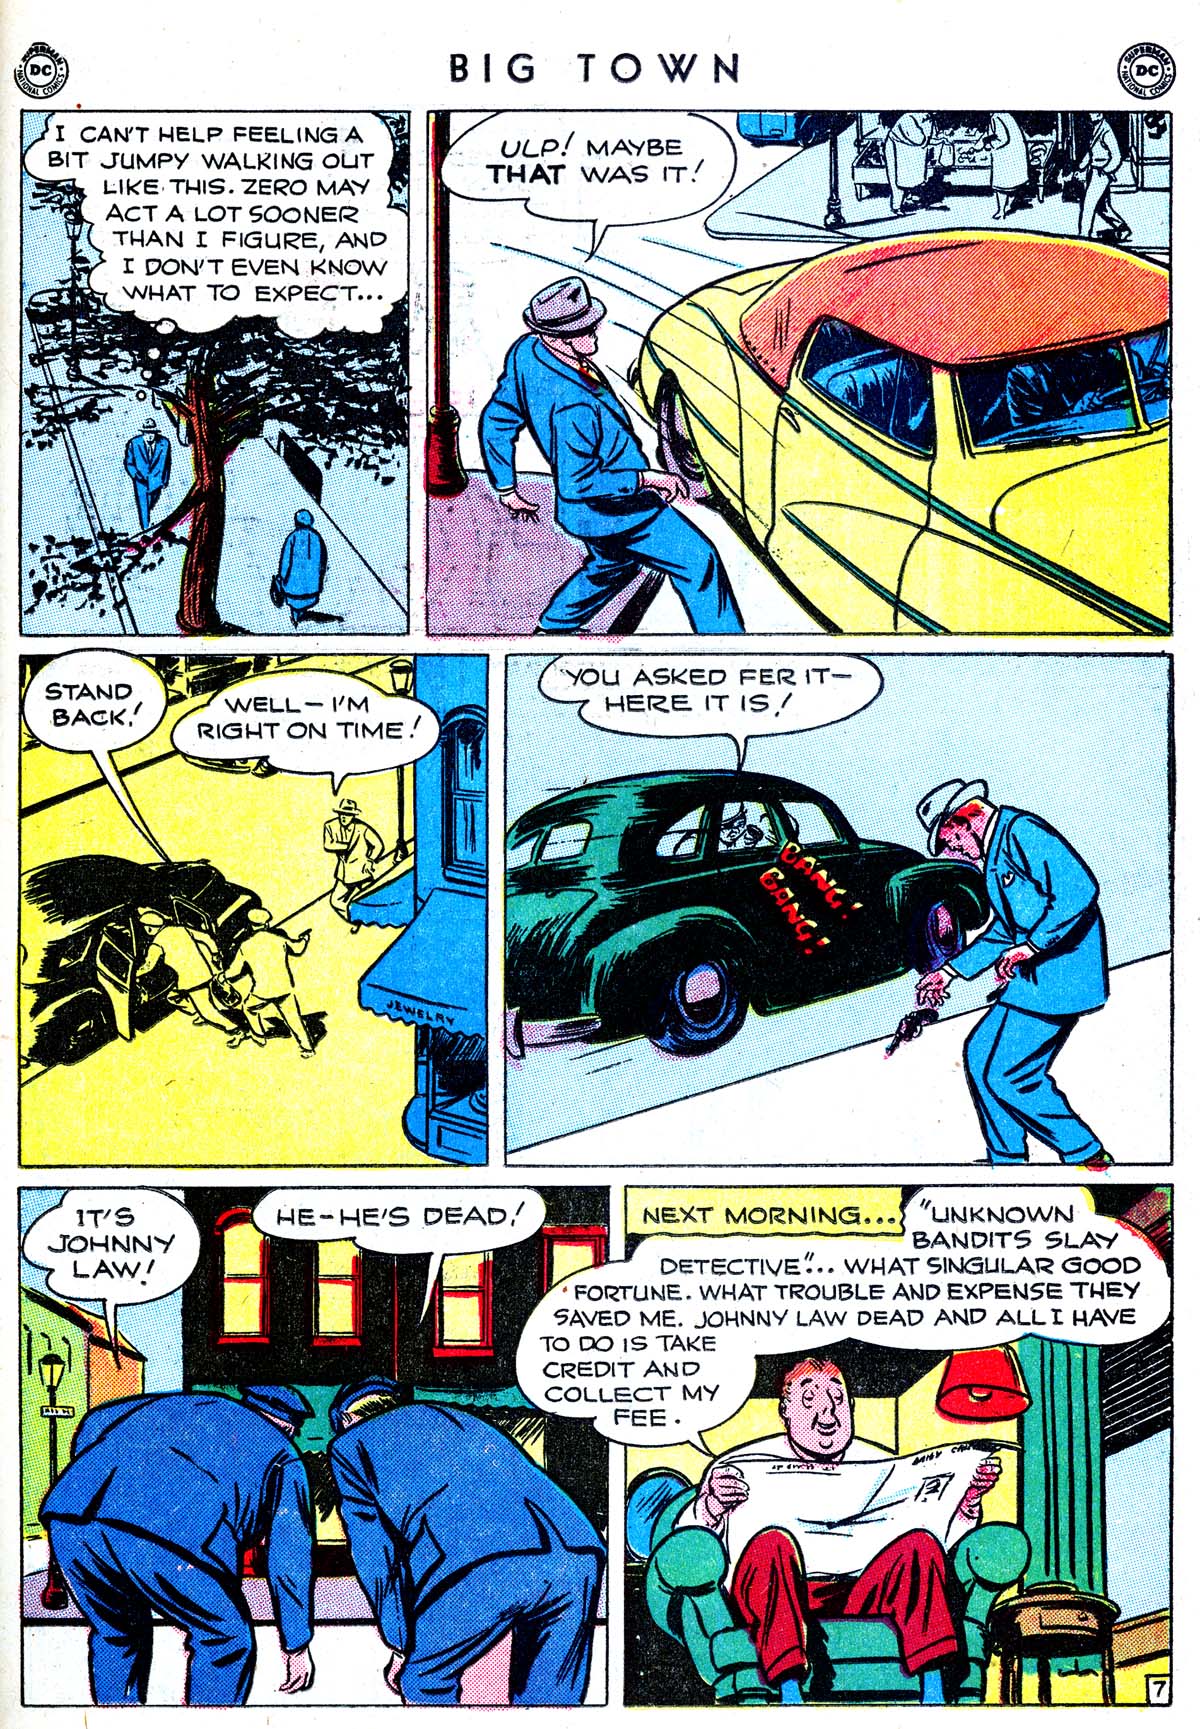 Big Town (1951) 4 Page 32